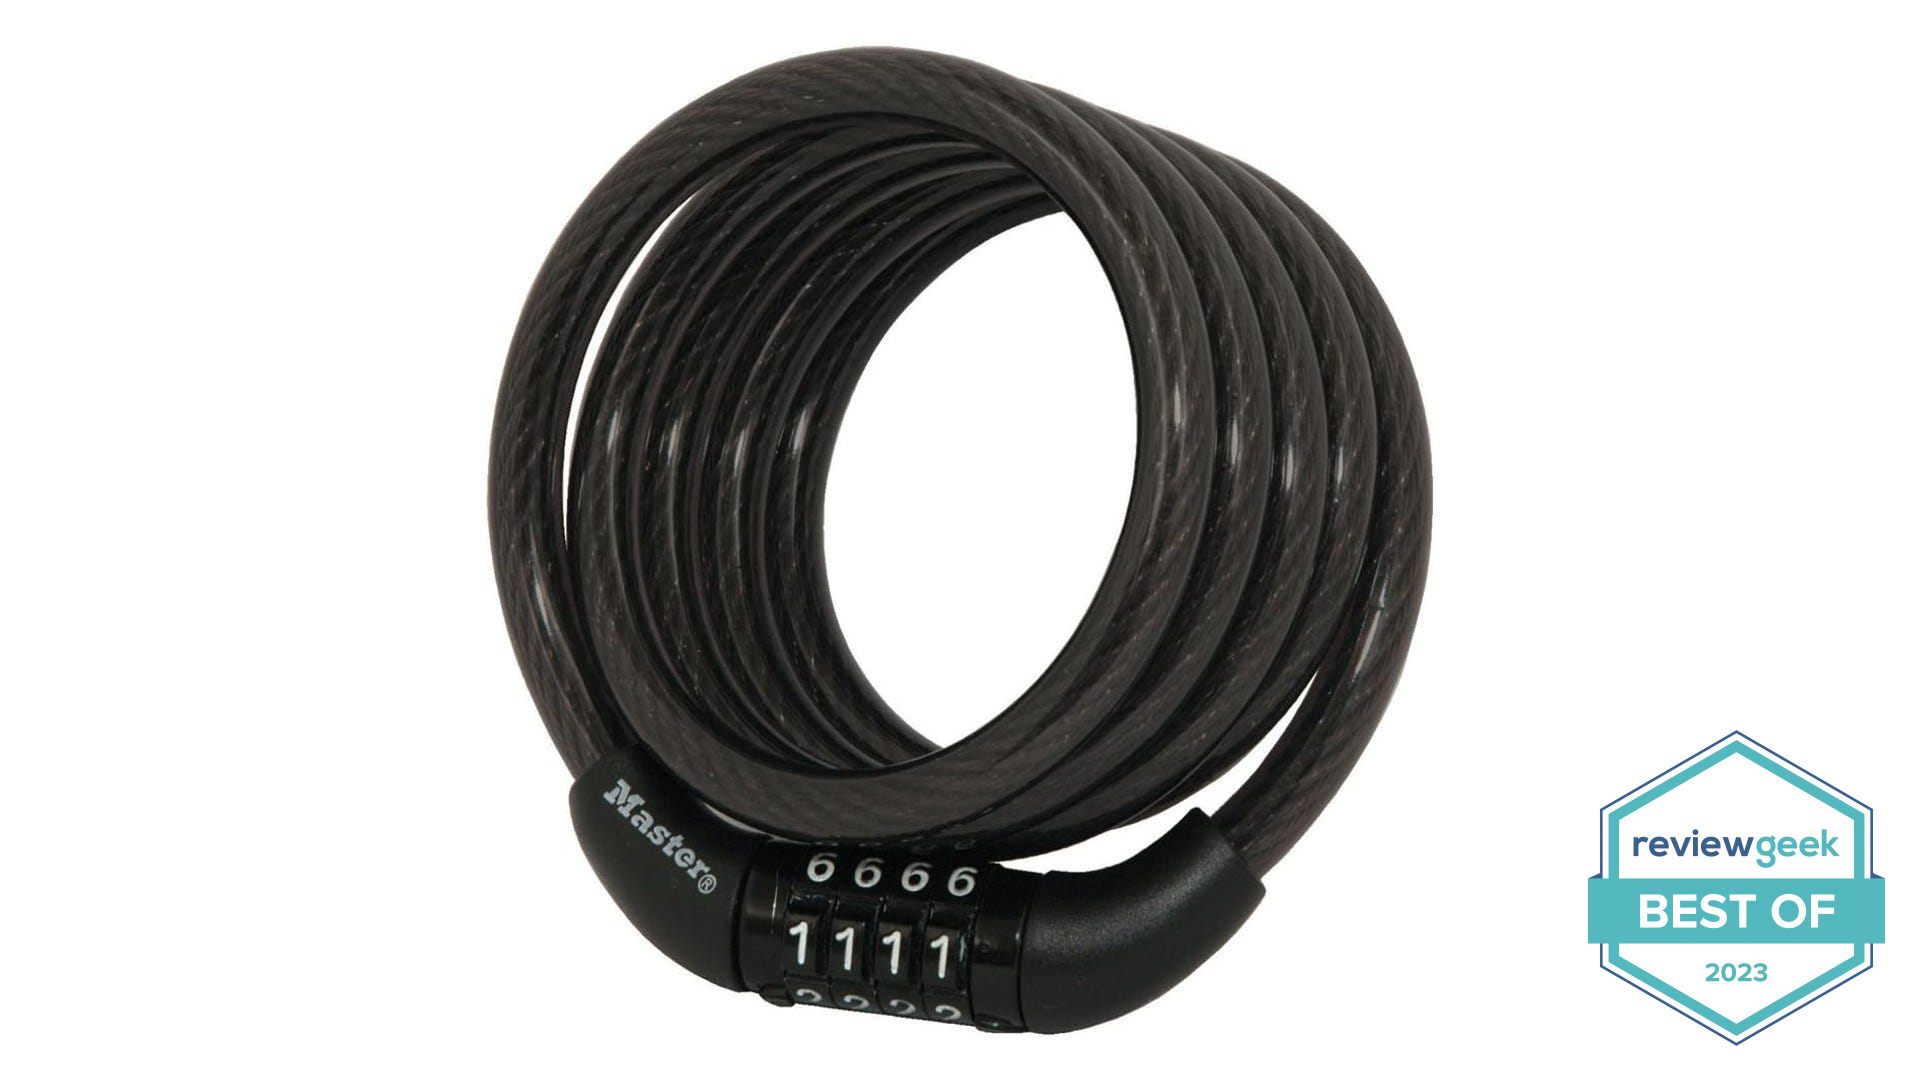 Master Lock 8143D Bike Combination Lock Cable on a white background